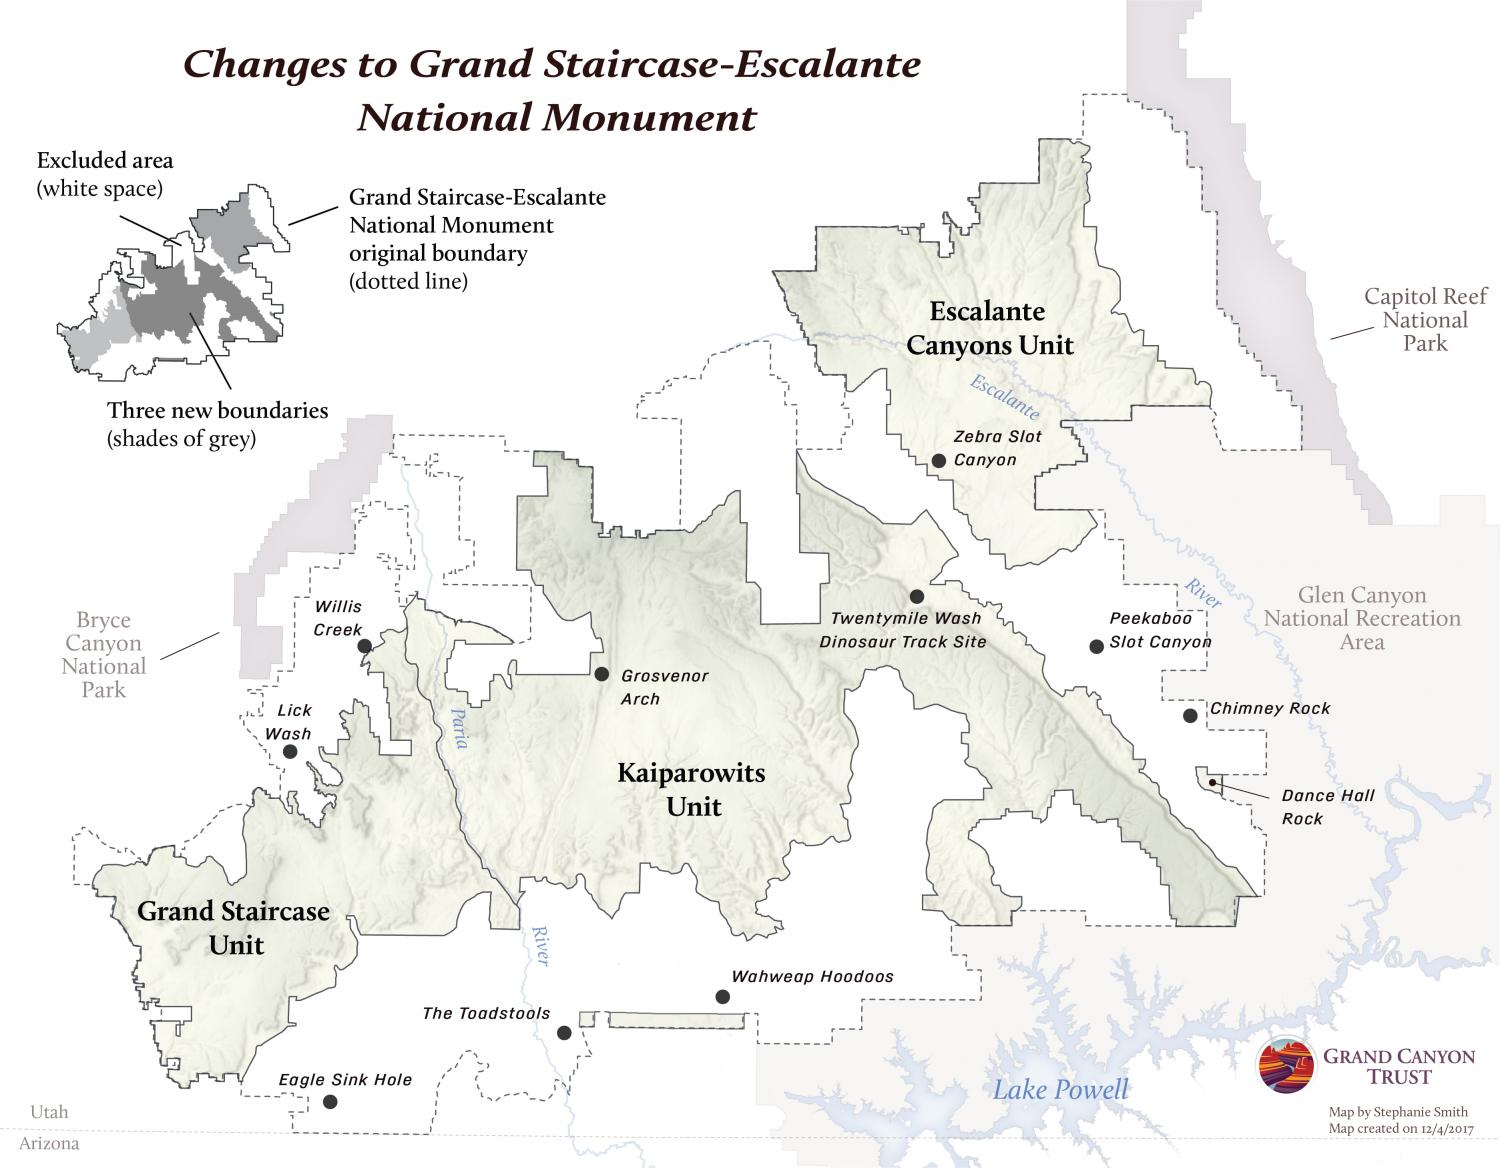 Changes to Grand Staircase-Escalante National Monuments